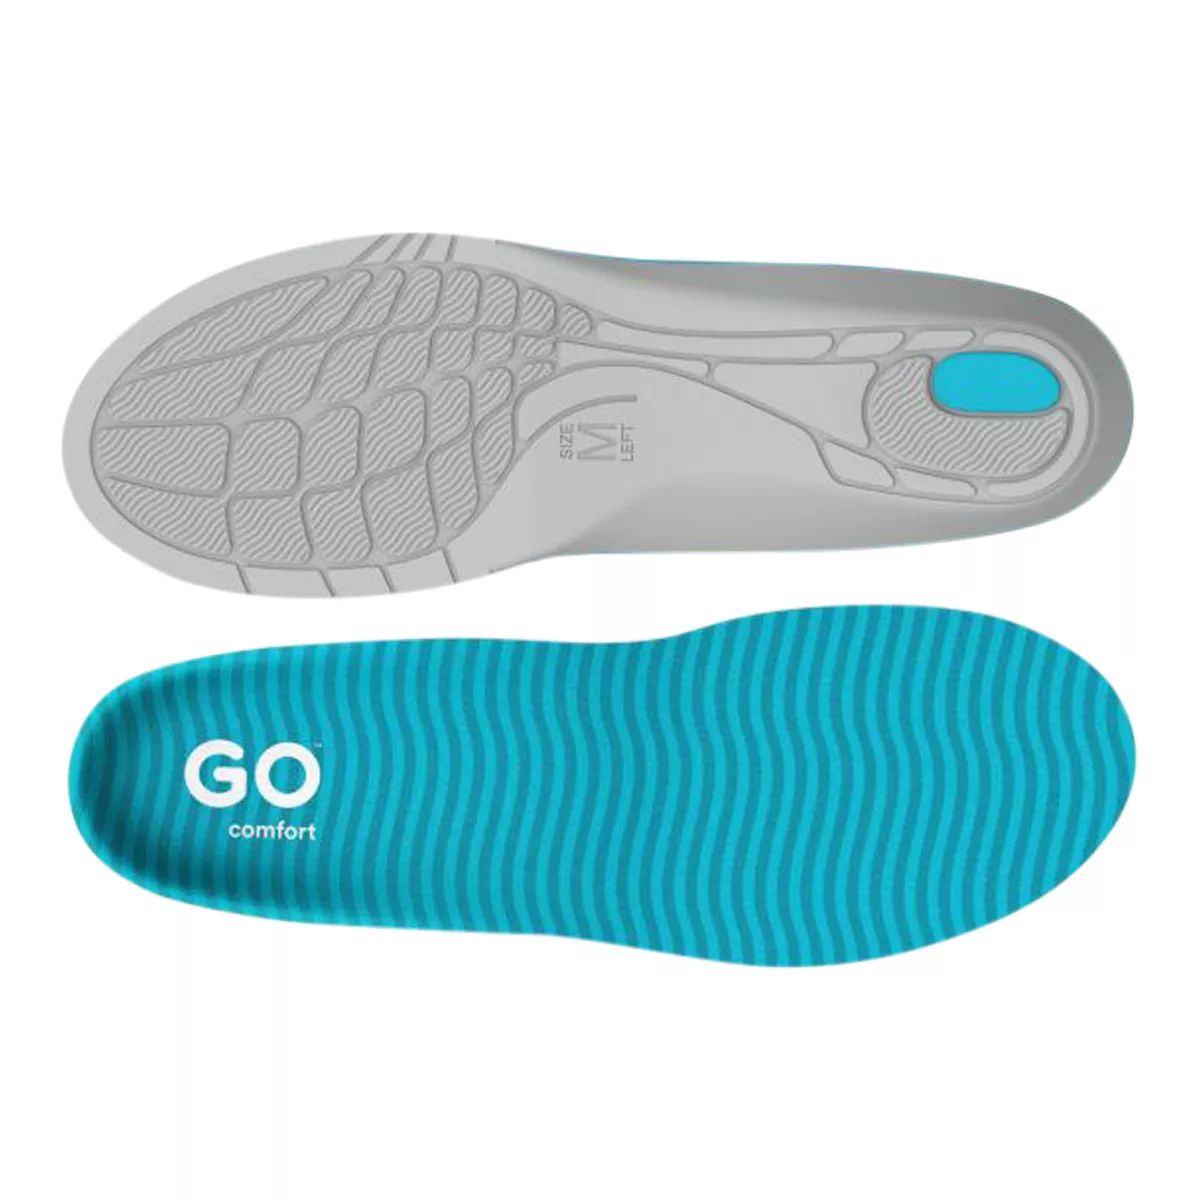 Superfeet Go Comfort All Day Insoles  Shoe Inserts